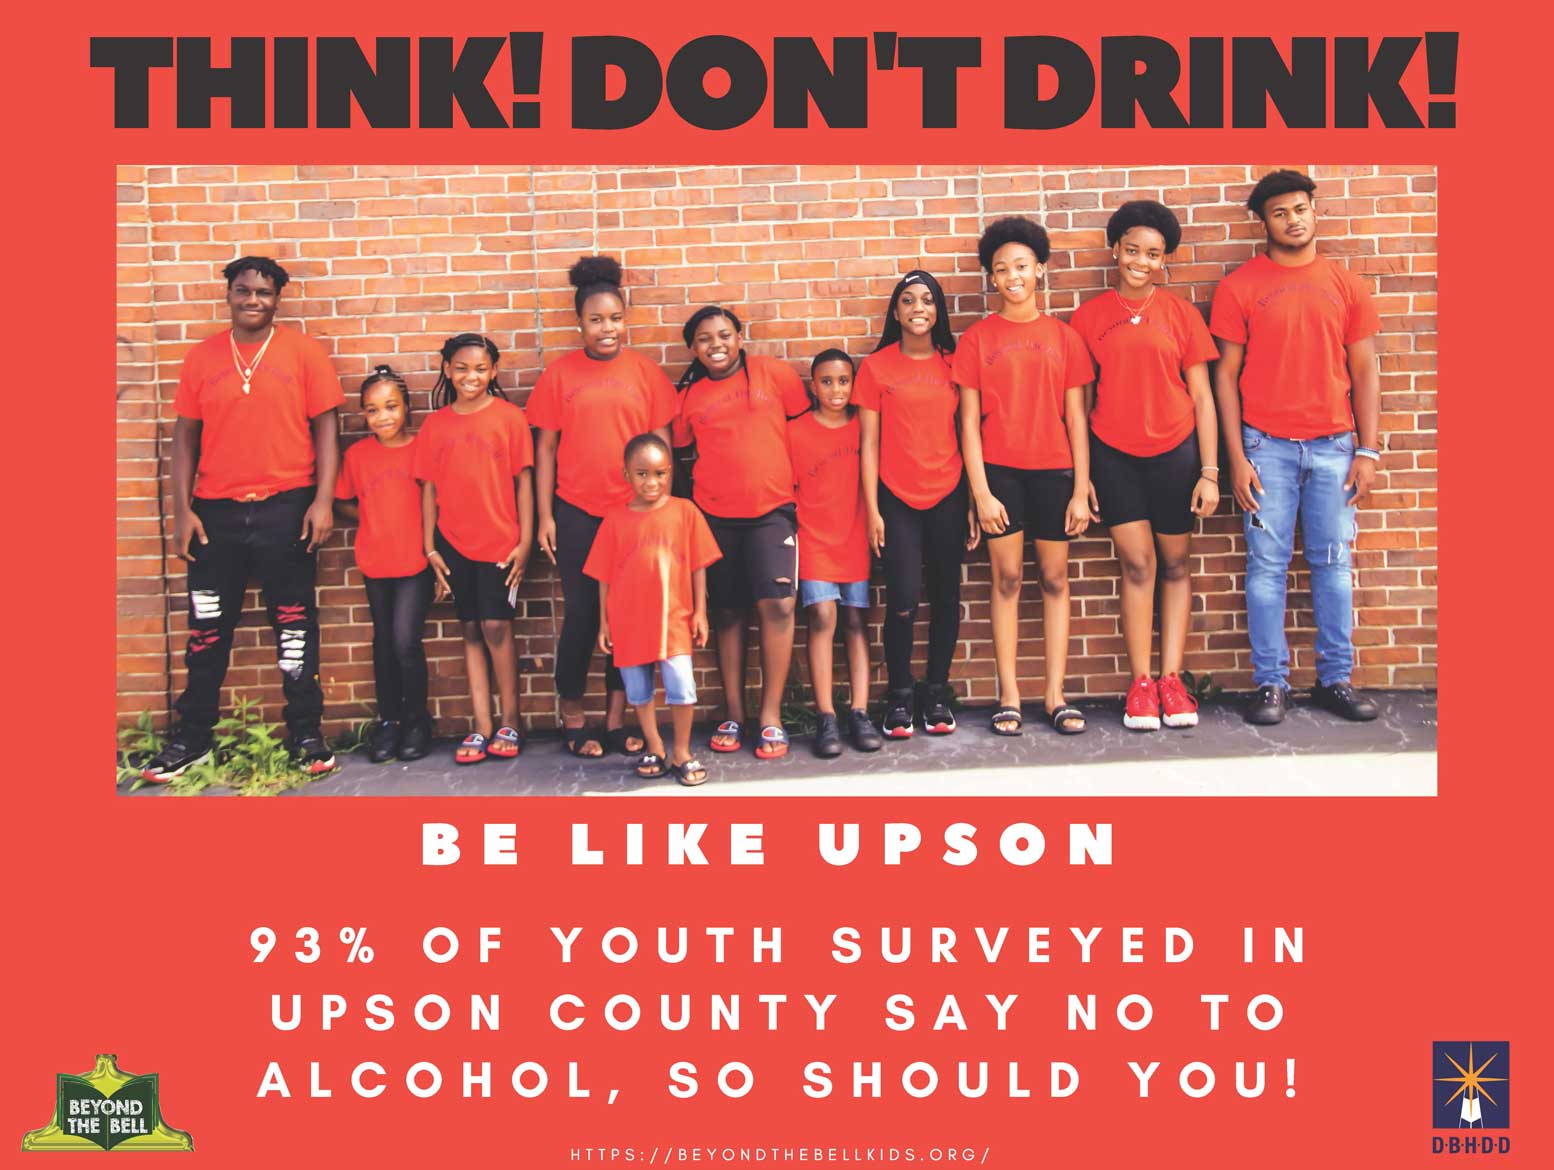 Black and white text on a red background. Think! Don't drink. Be like Upson. 93% of youth surveyed say no to alcohol, so should you. 12 African American children and teenagers wearing red shirts stand against a brick wall.